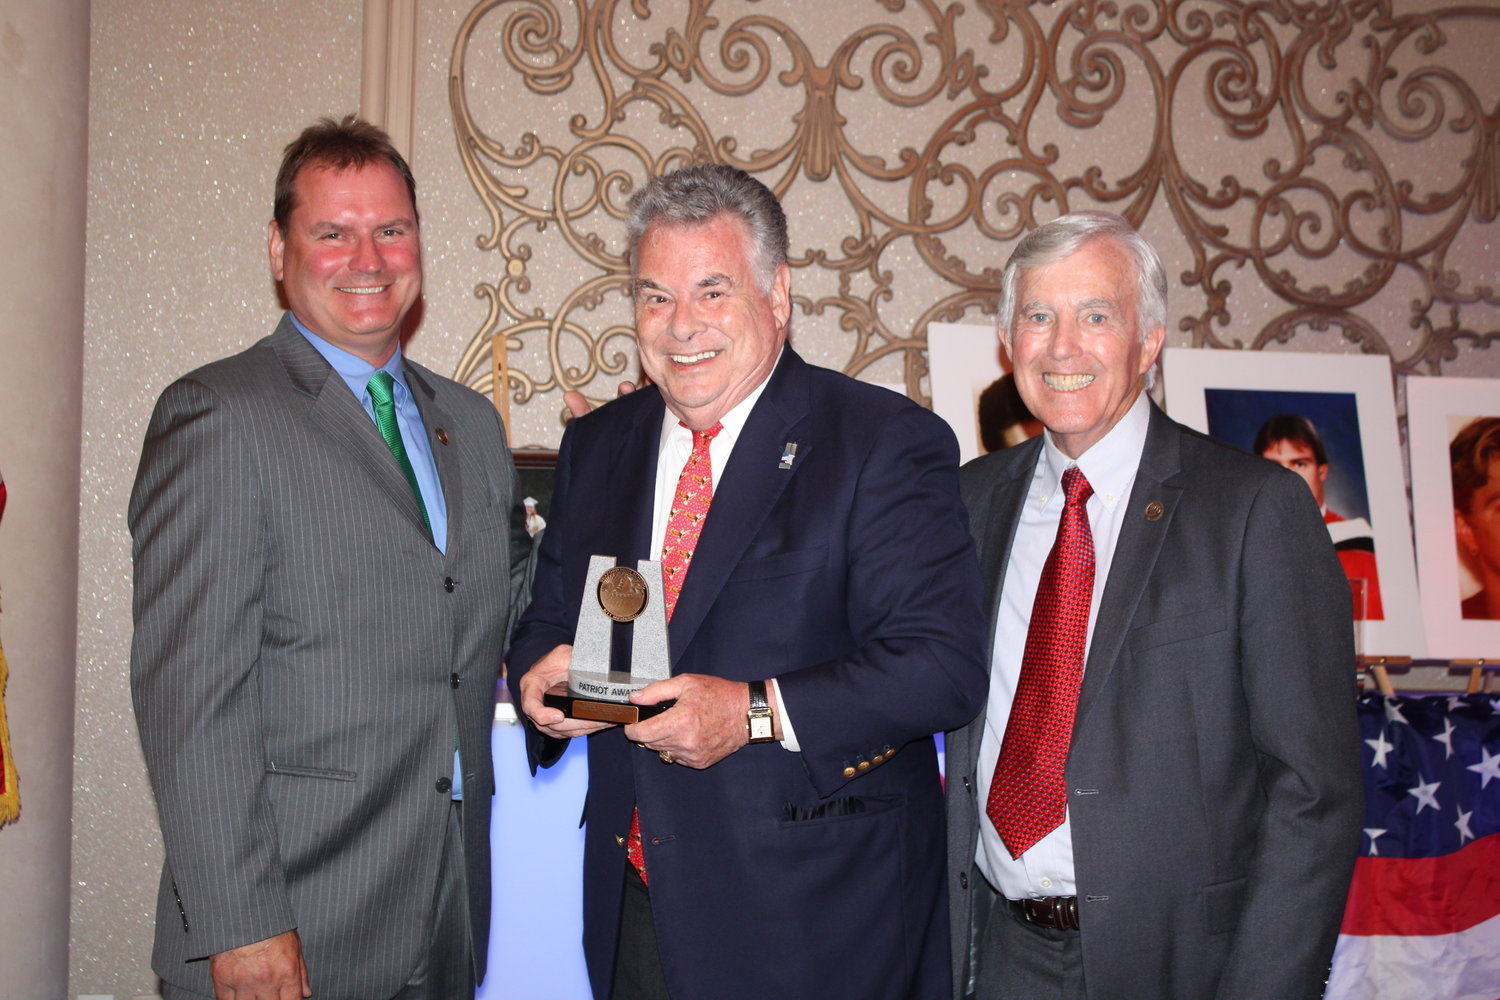 Kate Nalepinski/Herald
Seaford resident and 9/11 Memorial Committee President Ken Haskell, former U.S. Rep. Peter King and committee chairman Tom Condon at the Patriot Award dinner on June 29.